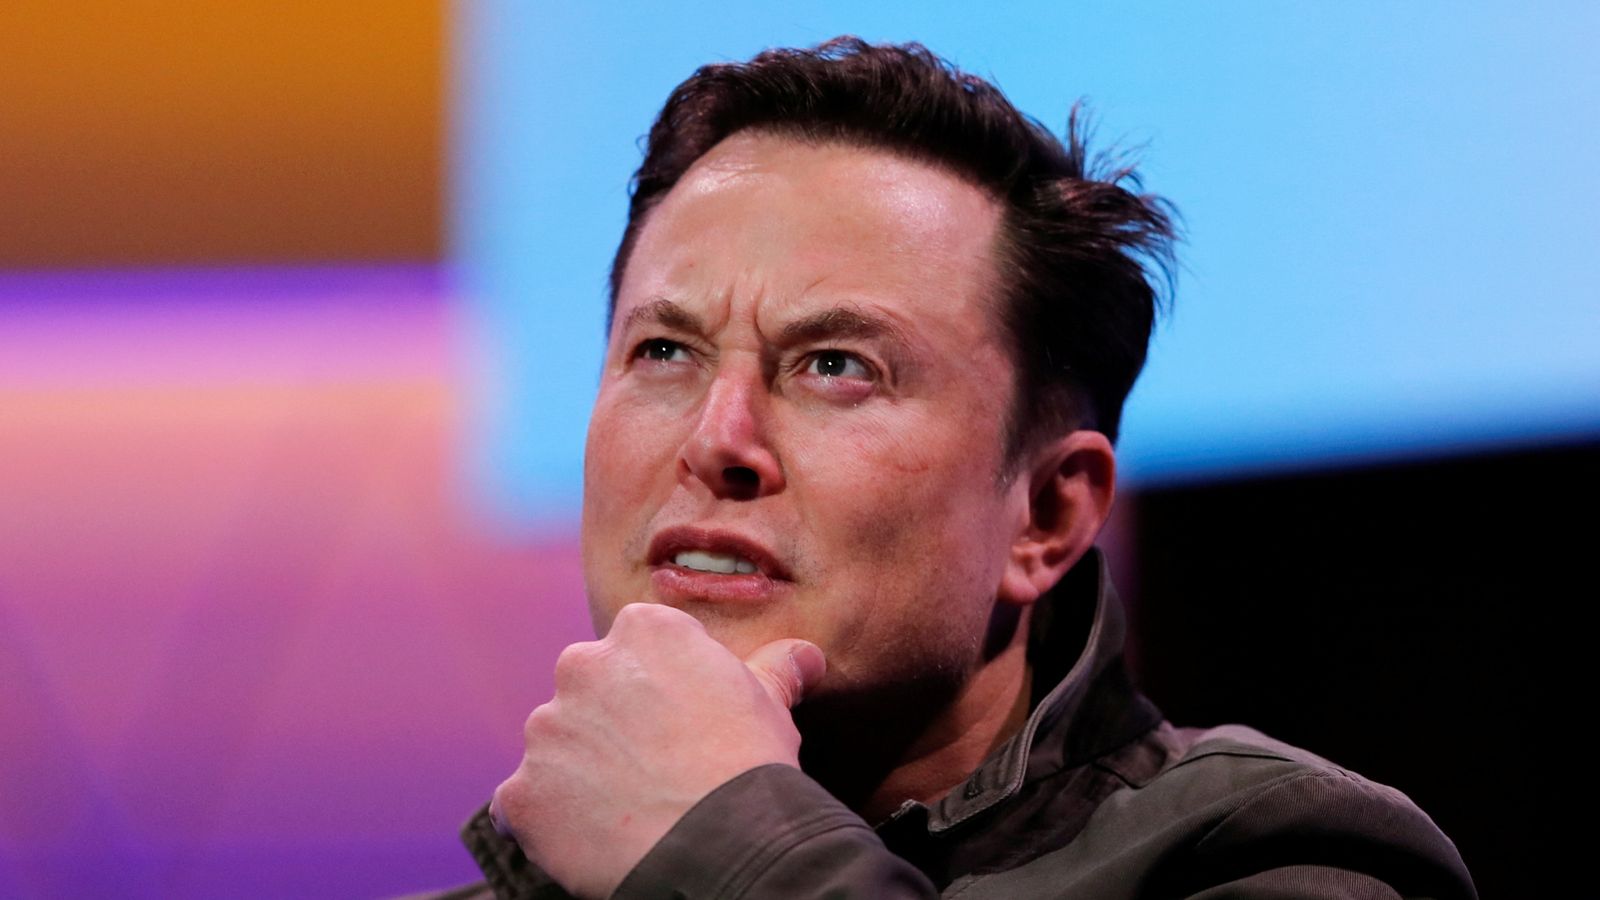 Elon Musk secures £35.6bn funding for Twitter takeover attempt